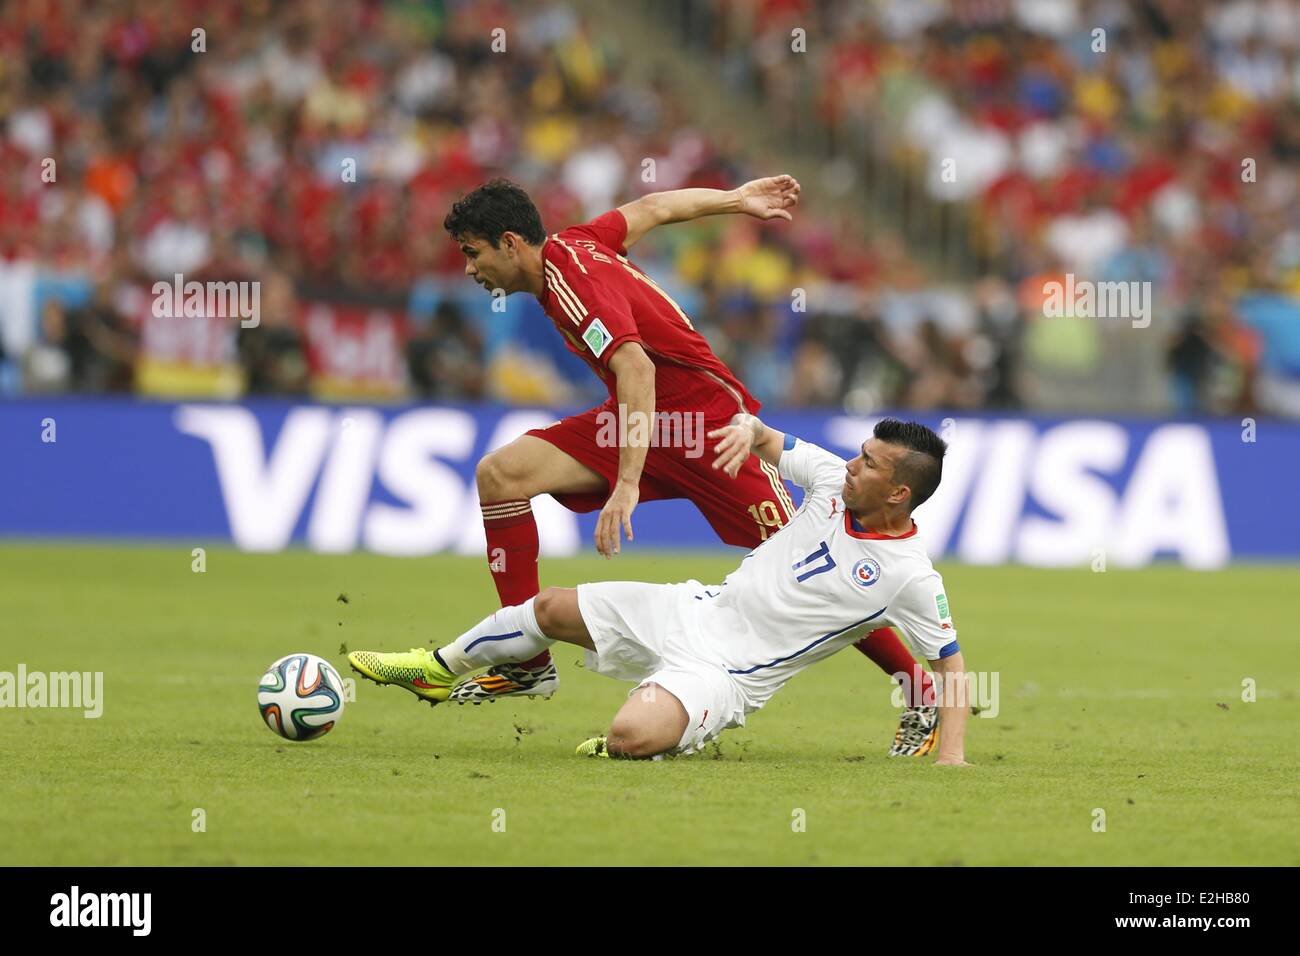 Rio de Janeiro, Brazil. 18th June, 2014. Diego Costa (ESP), Eduardo Vargas (CHI) Football/Soccer : FIFA World Cup Brazil match between Spain and Chile at the Maracana Stadium in Rio de Janeiro, Brazil . © AFLO/Alamy Live News Stock Photo